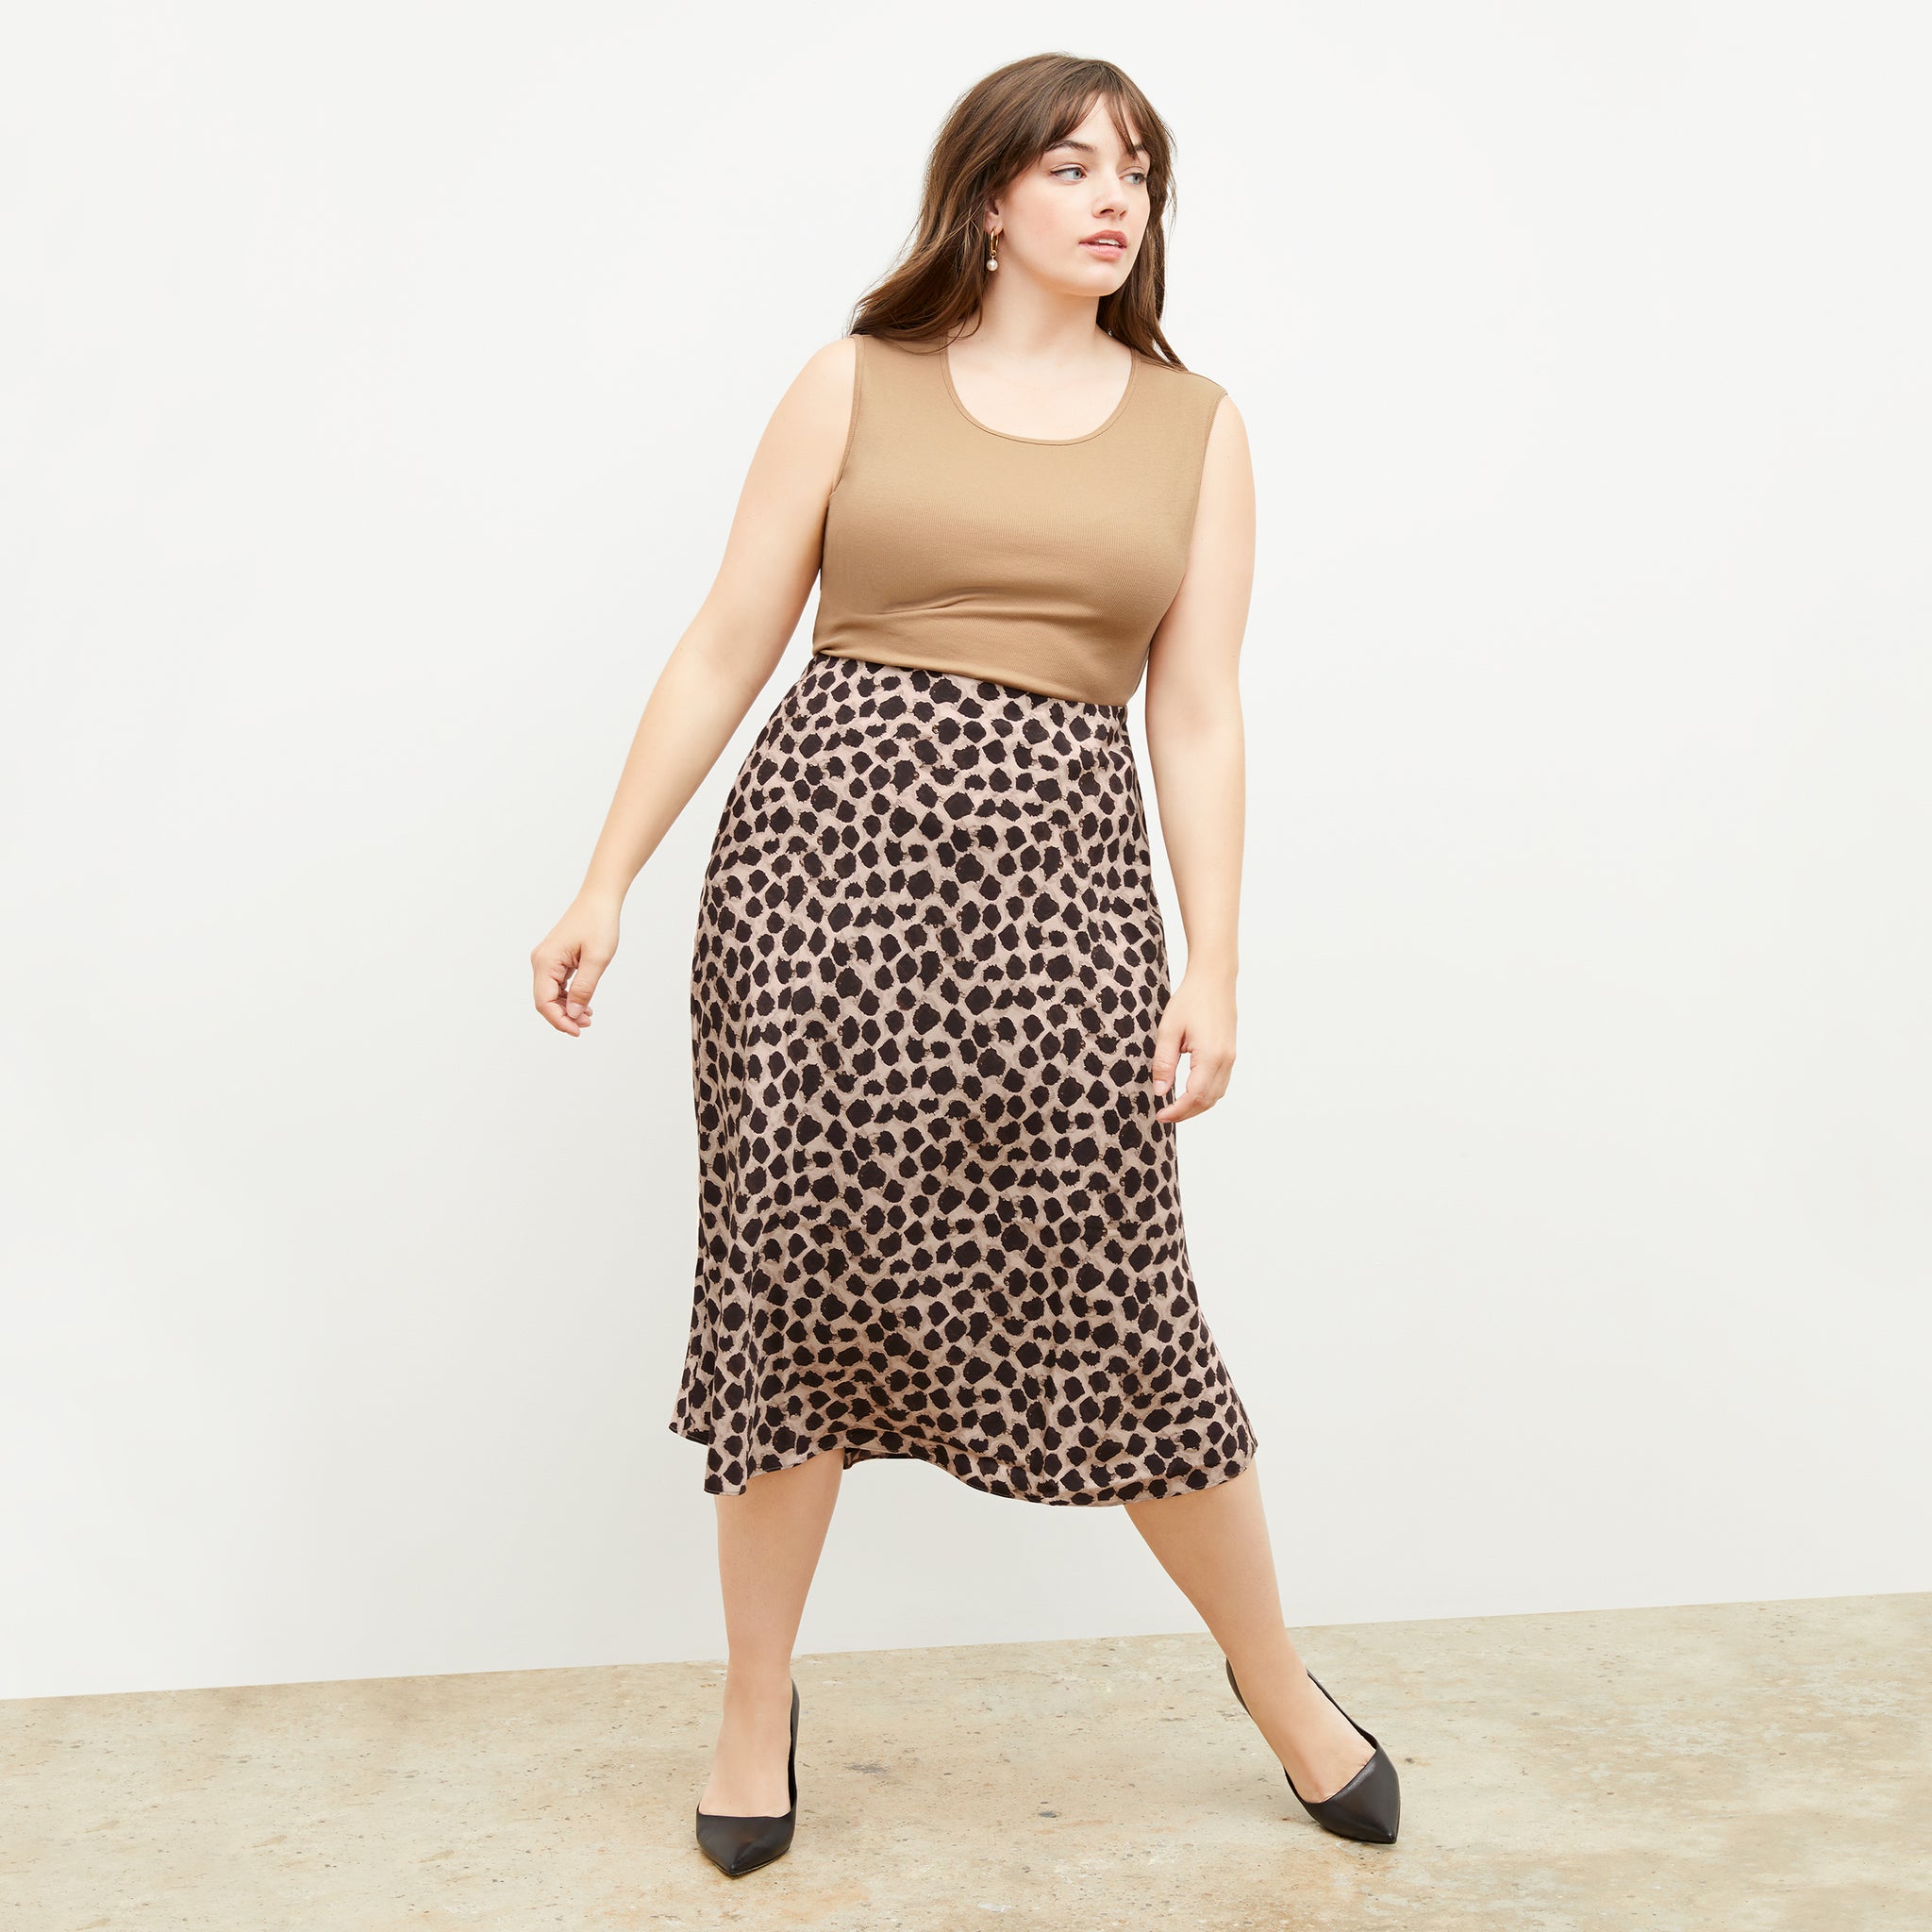 Front image of a woman wearing the orchard skirt in sahara print